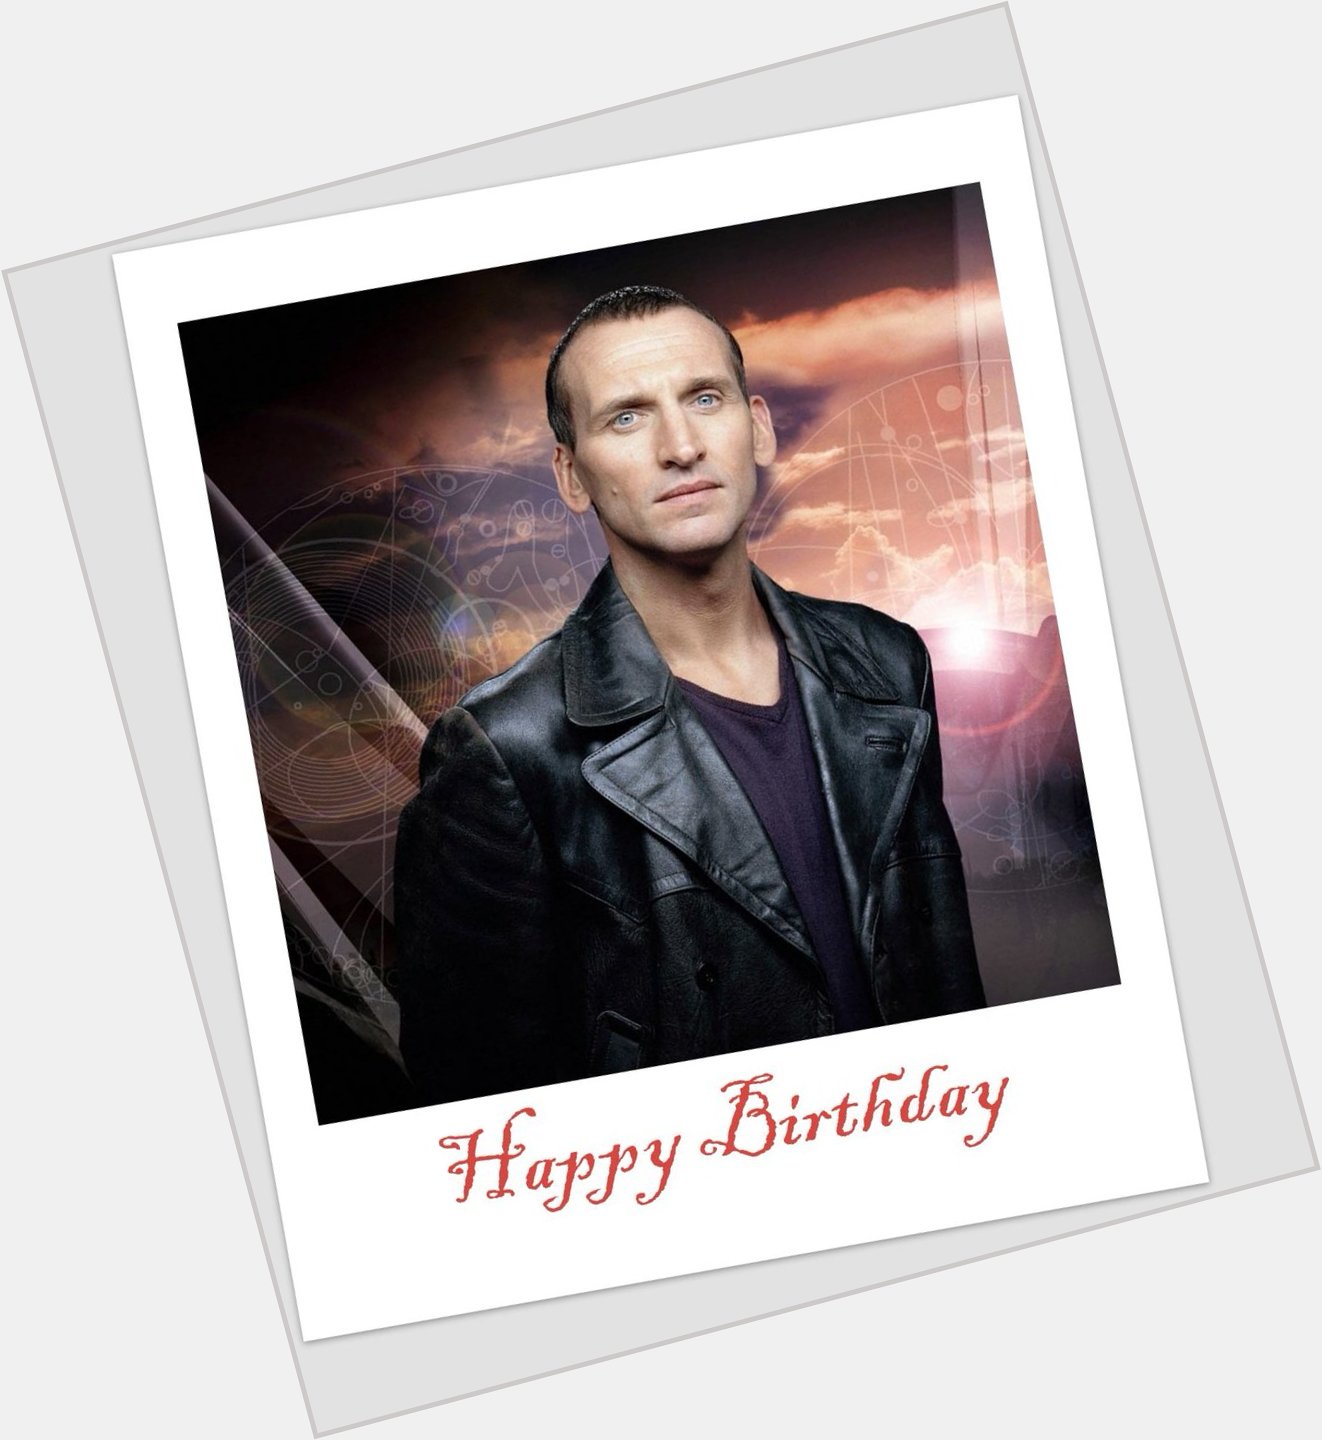 !!!! Happy Birthday Doctor (Christopher Eccleston) !!!!
I remember the day when you were absolutely fantastic !!!! 